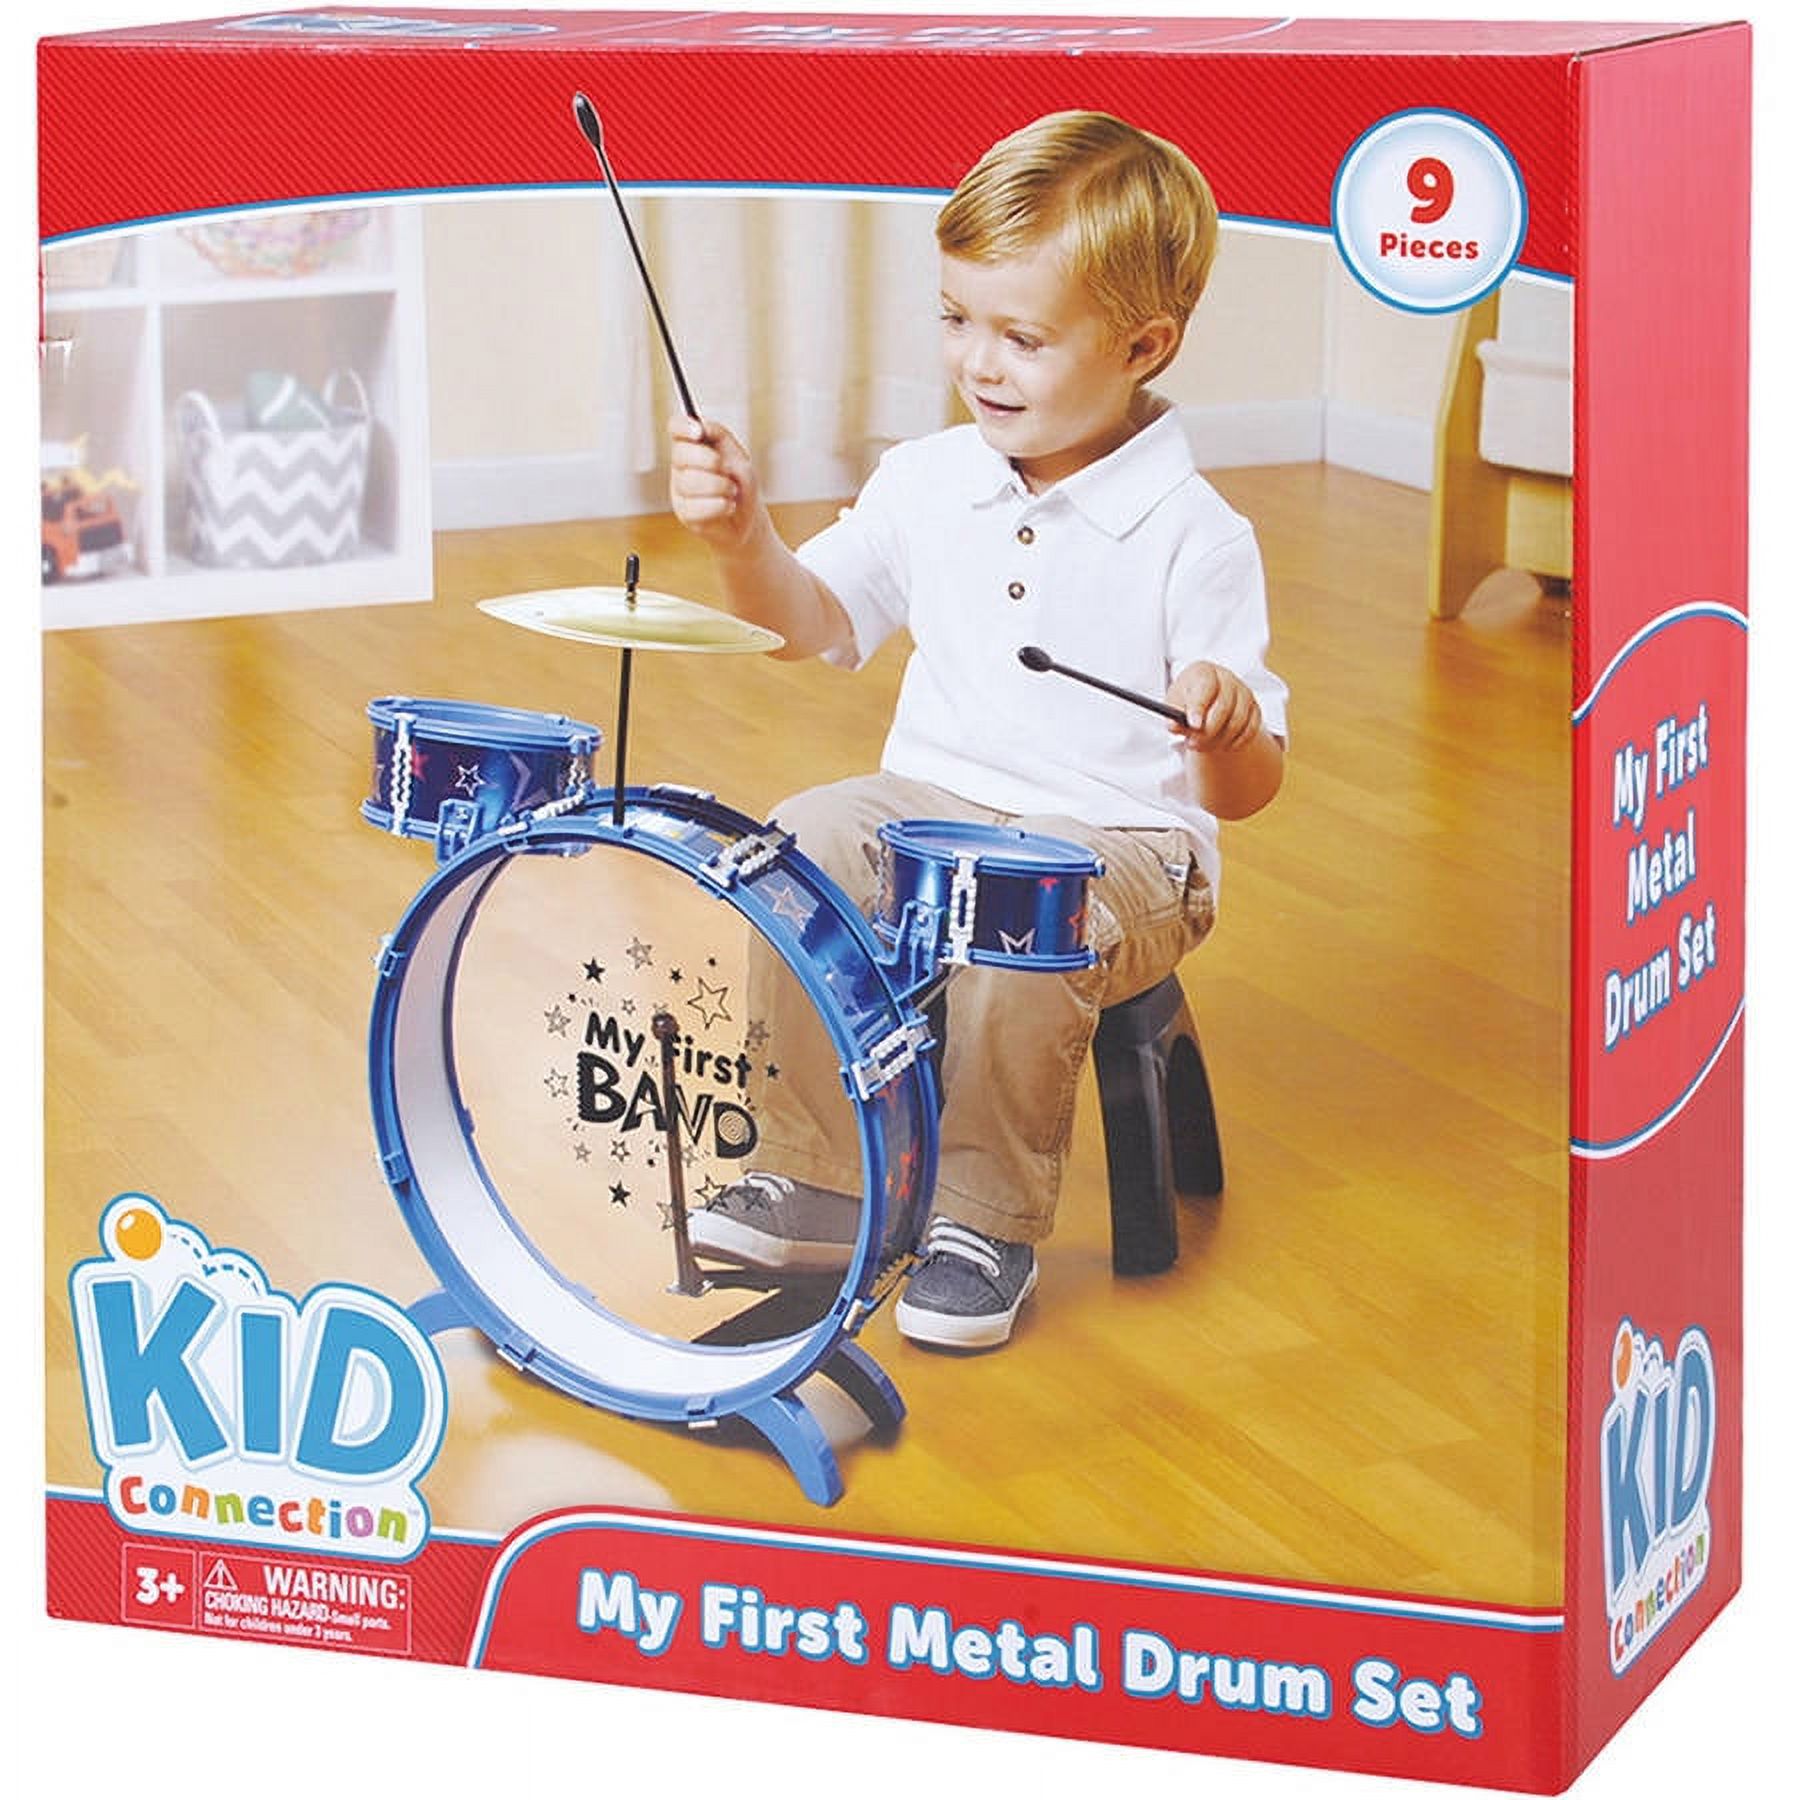 Kid Connection My First Metal Drum Set, Blue - image 2 of 2